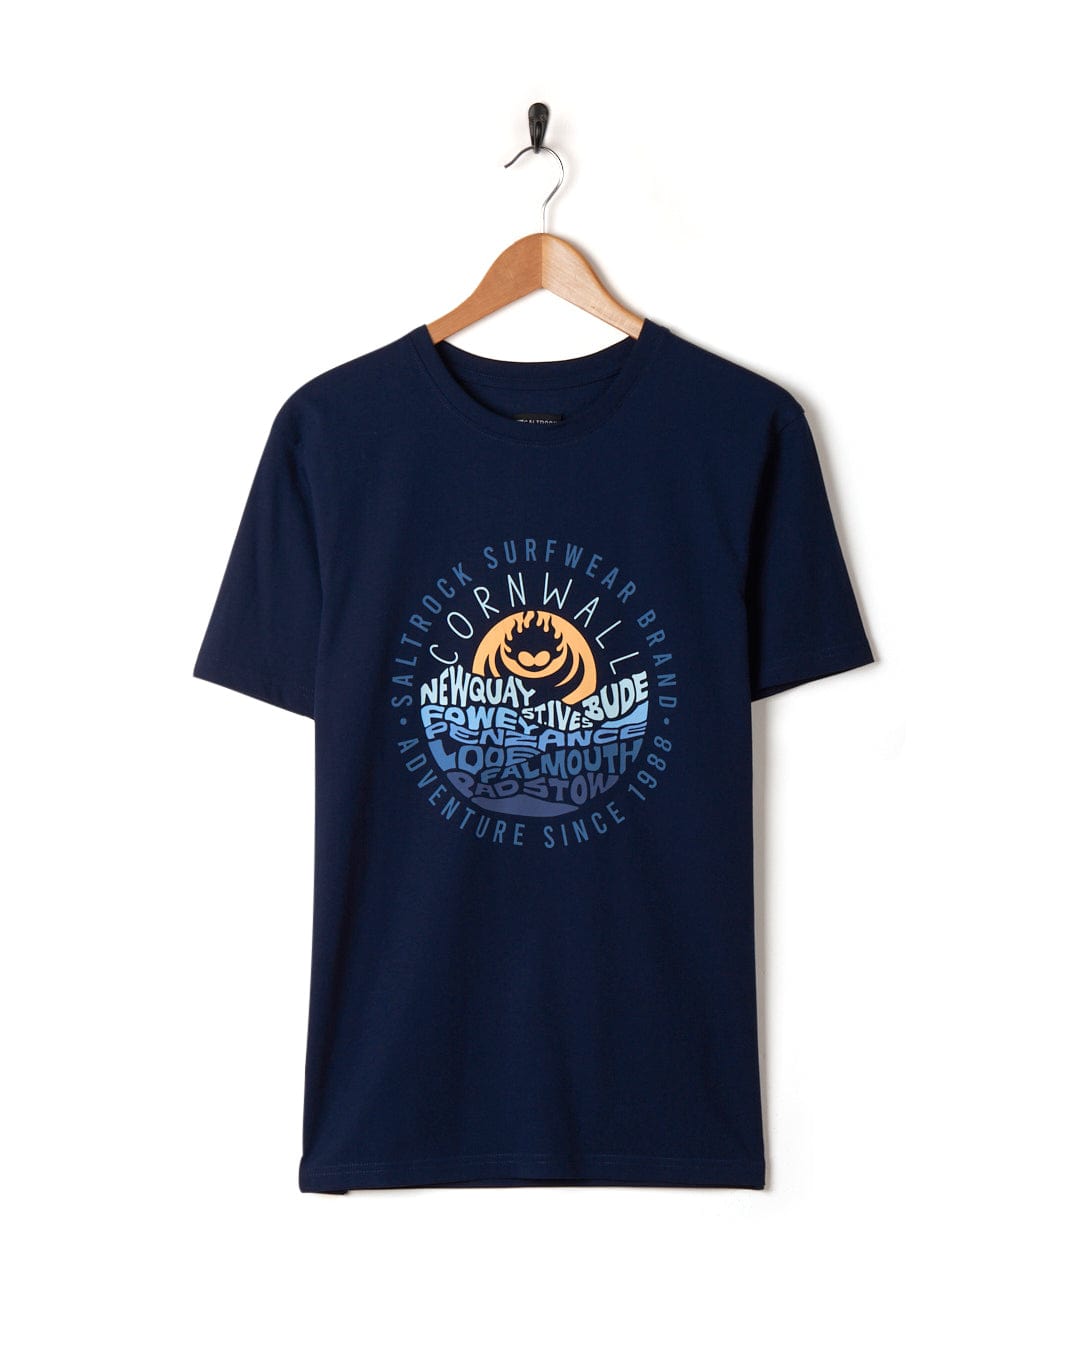 A Layers Cornwall - Mens Short Sleeve T-Shirt - Blue from Saltrock with an image of a surfboard on it.